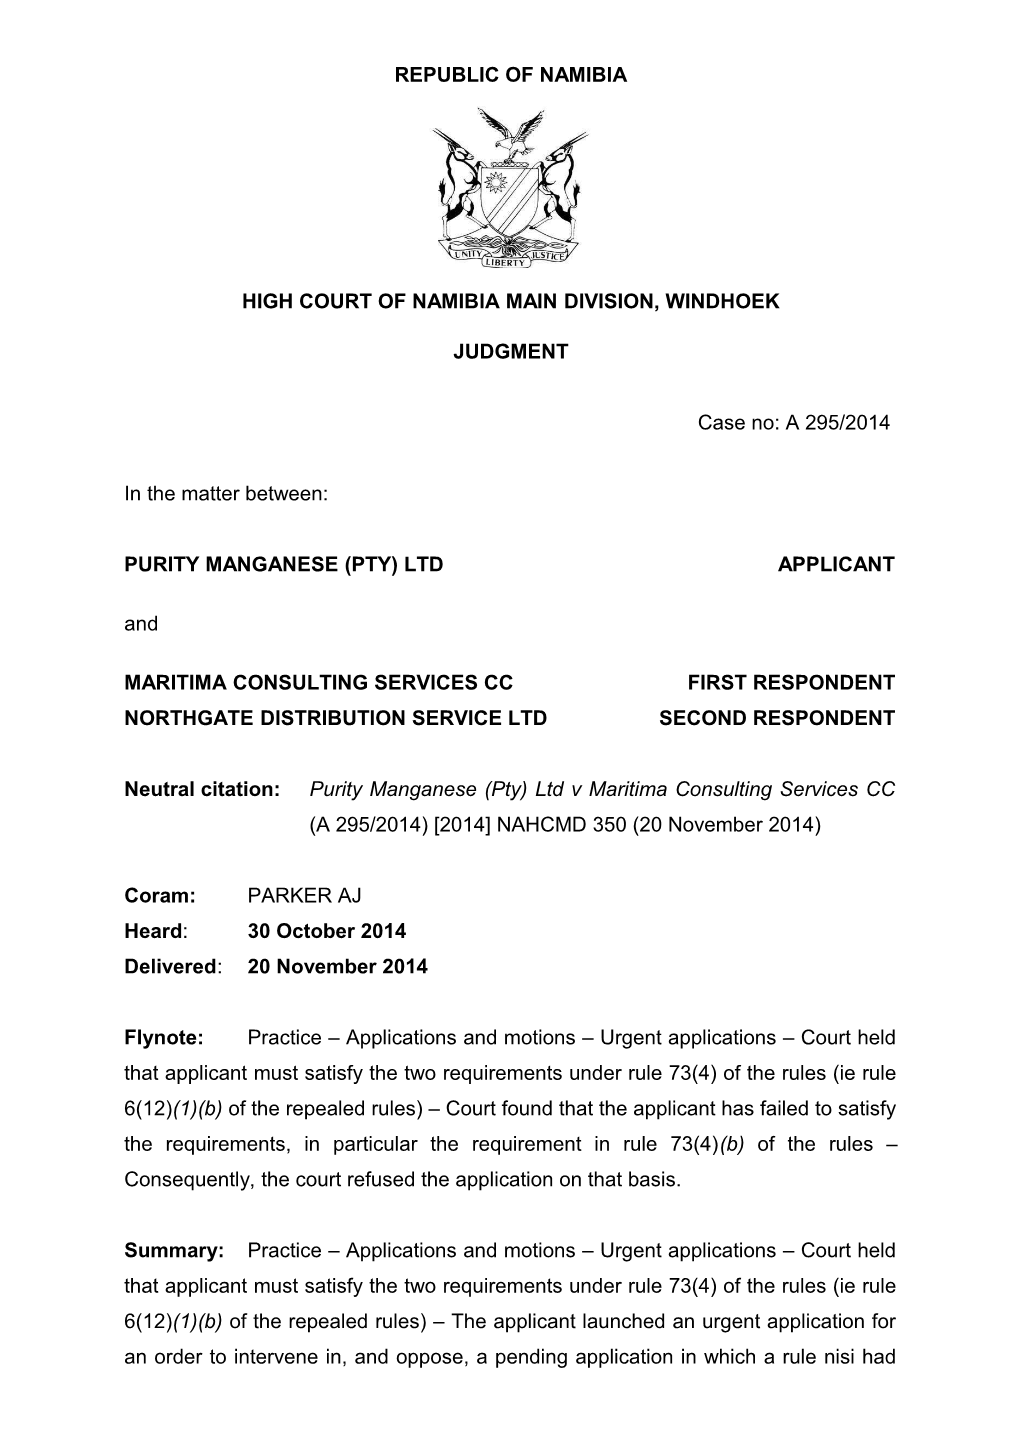 Purity Manganese (Pty) Ltd V Maritima Consulting Services CC (A 295-2014) 2014 NAHCMD 350